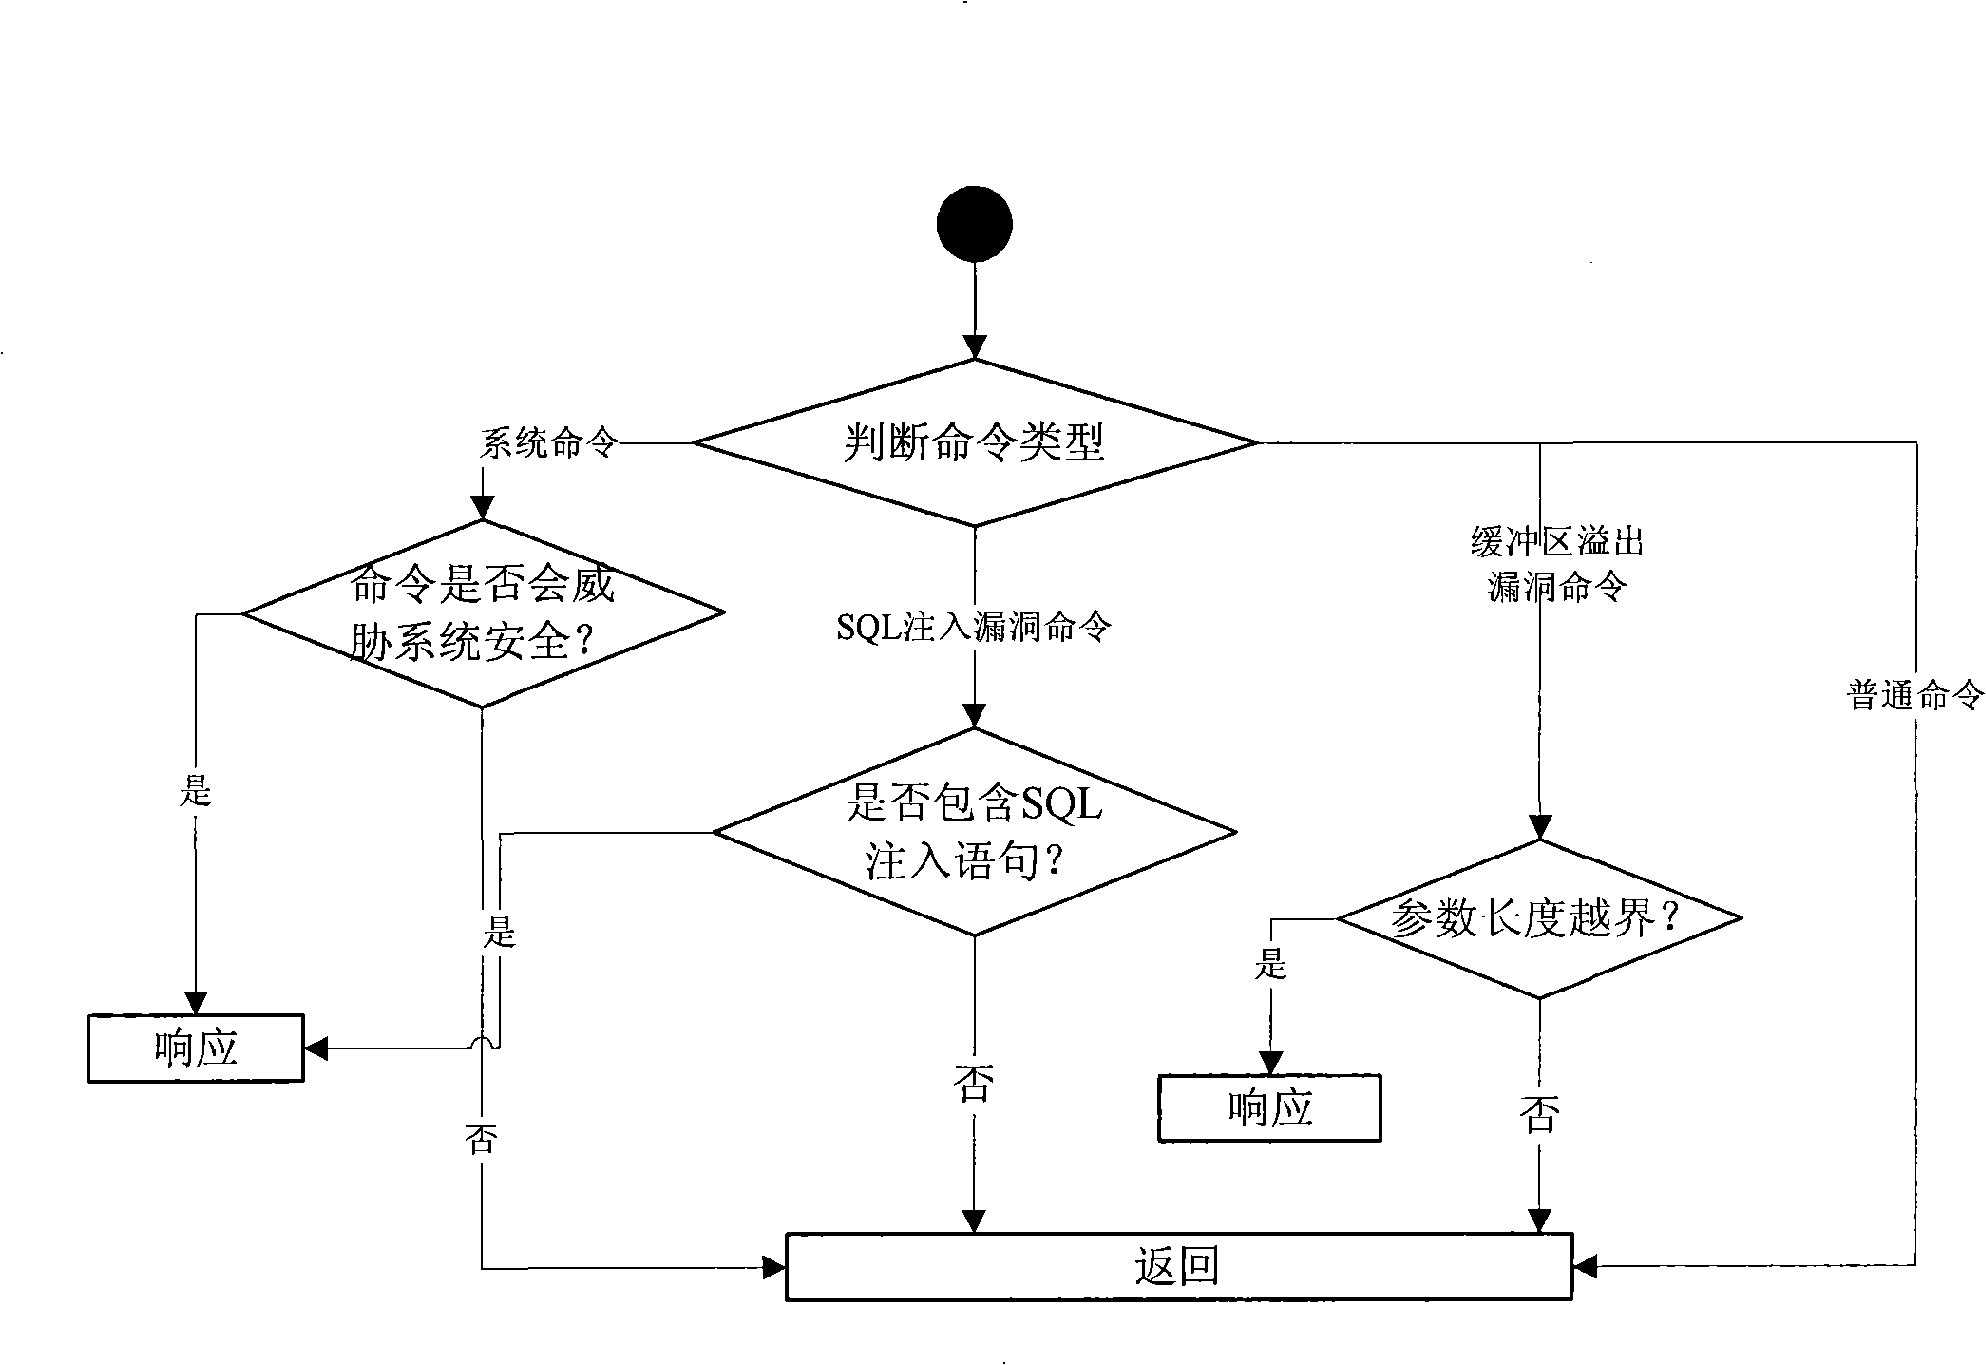 Method for enhancing the database security based on agent way